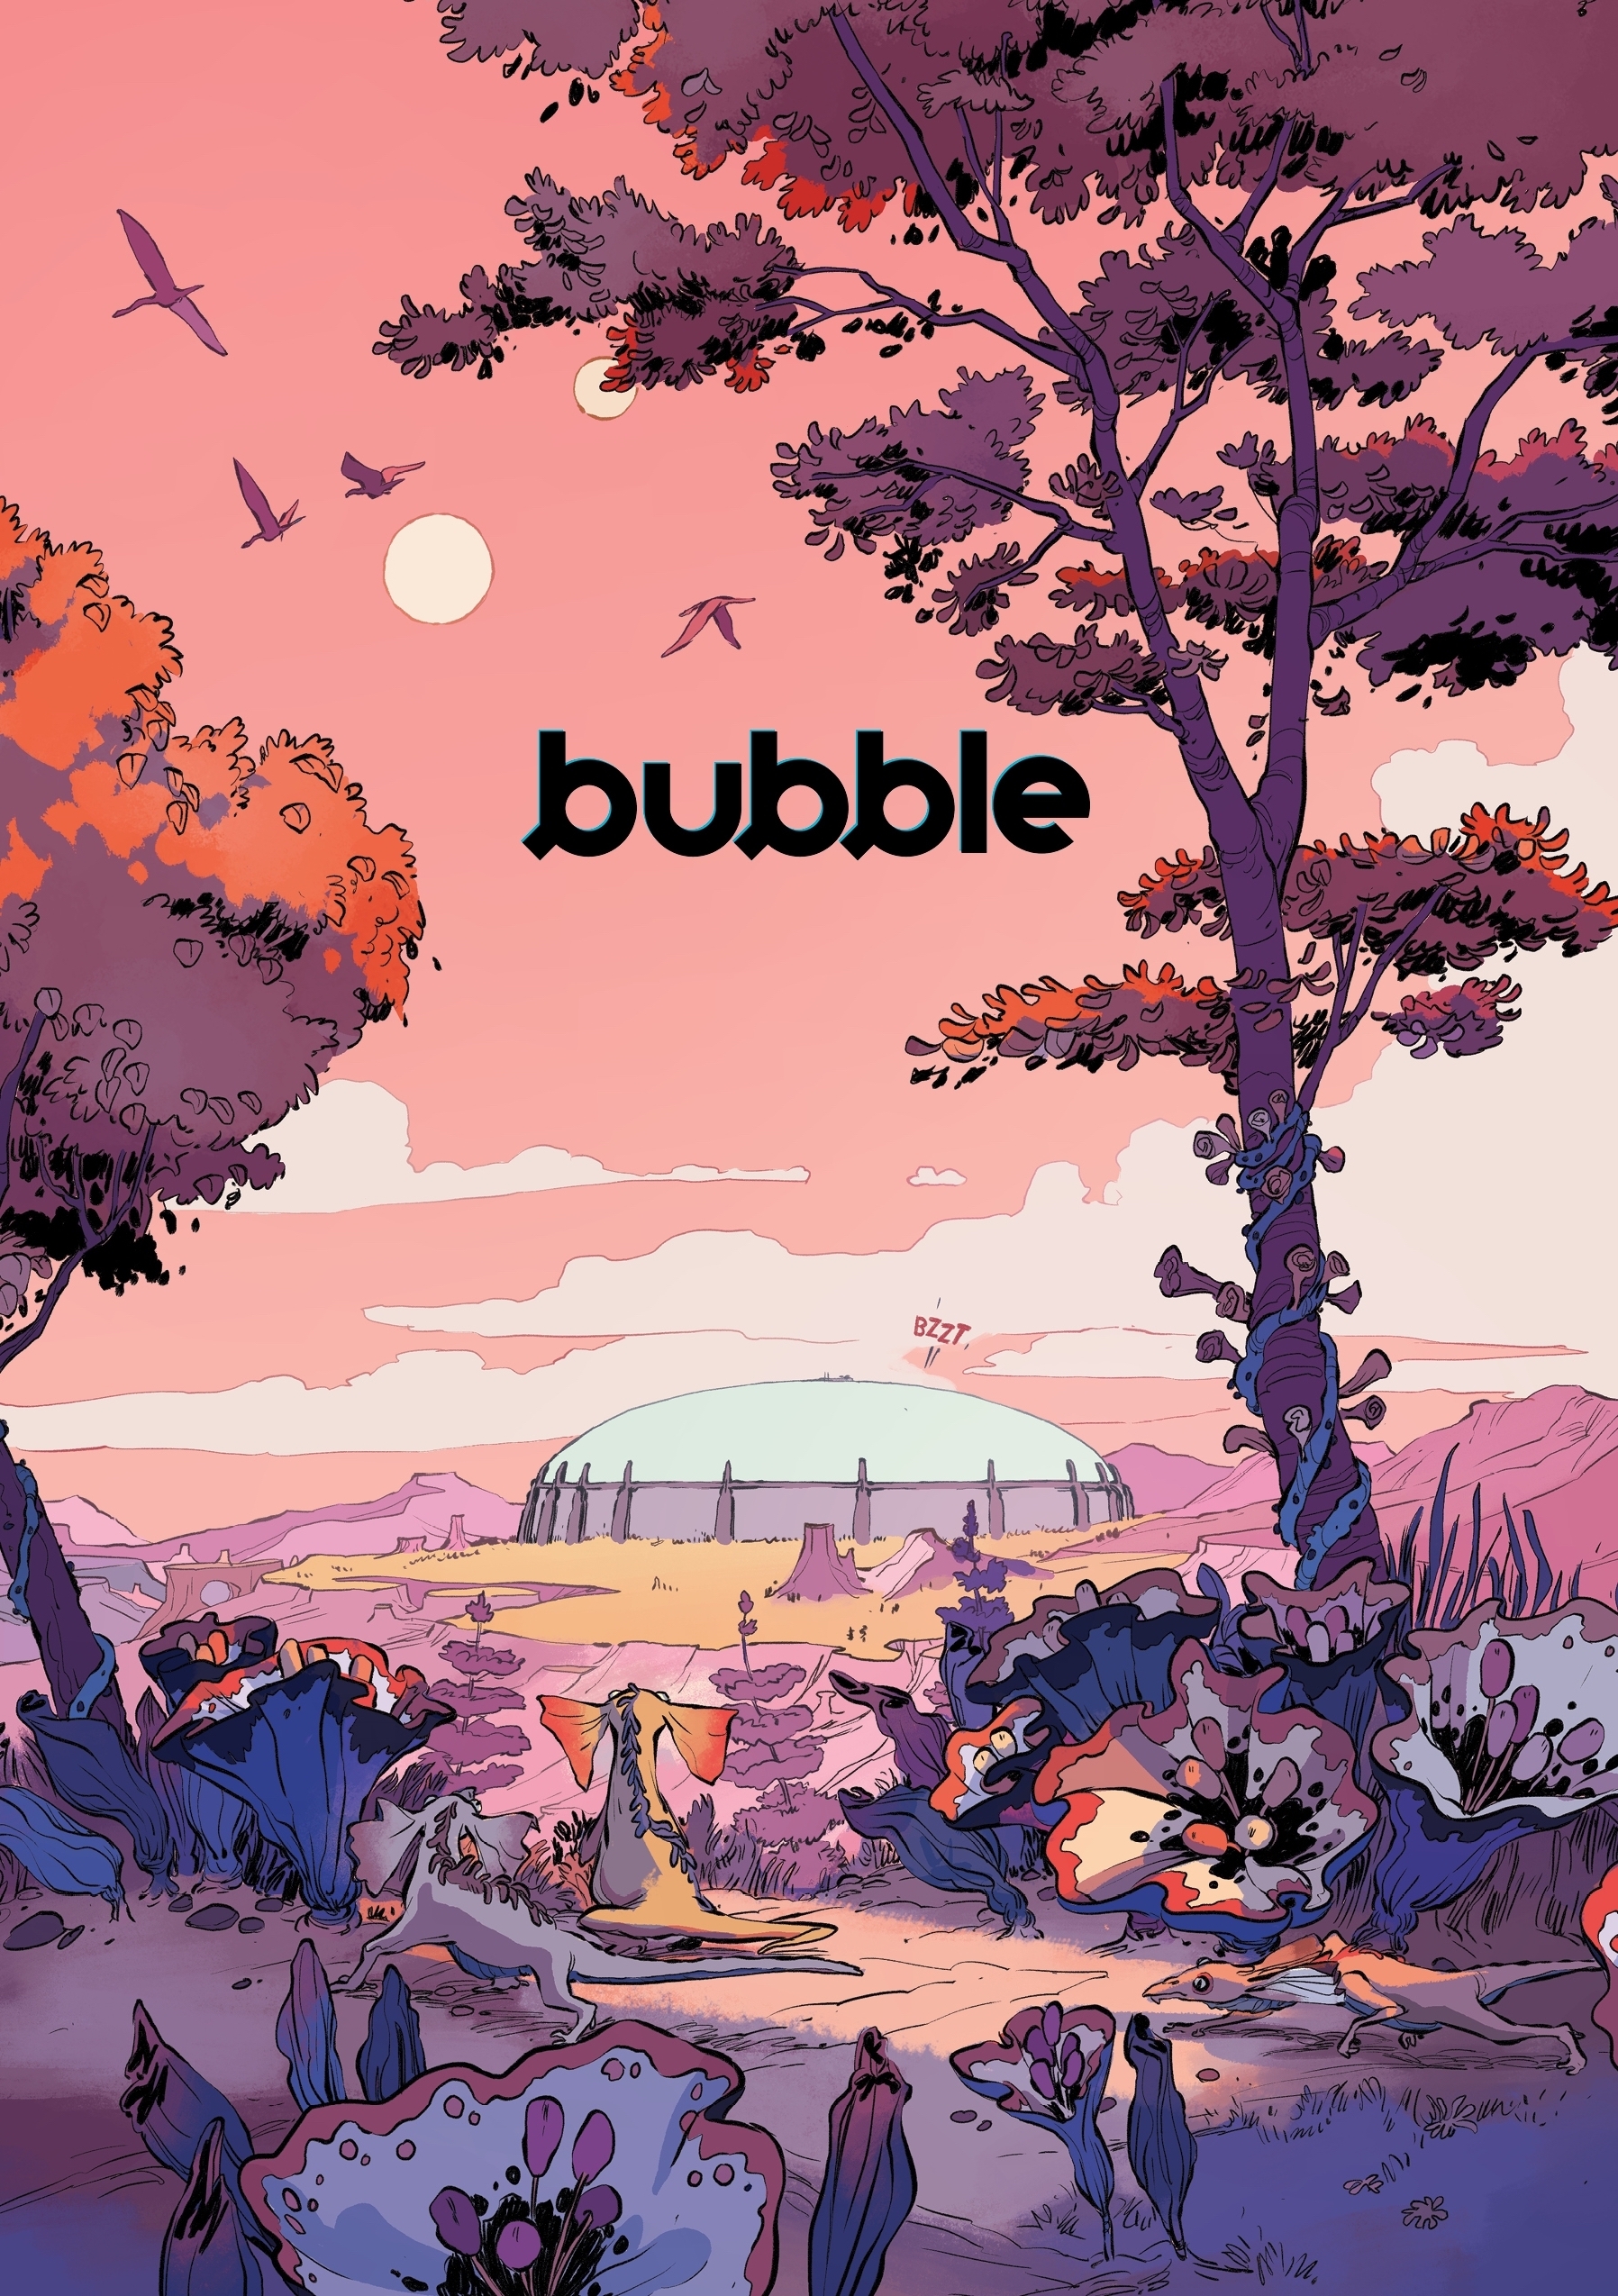 Graphic novel Bubble is an ideal summer read